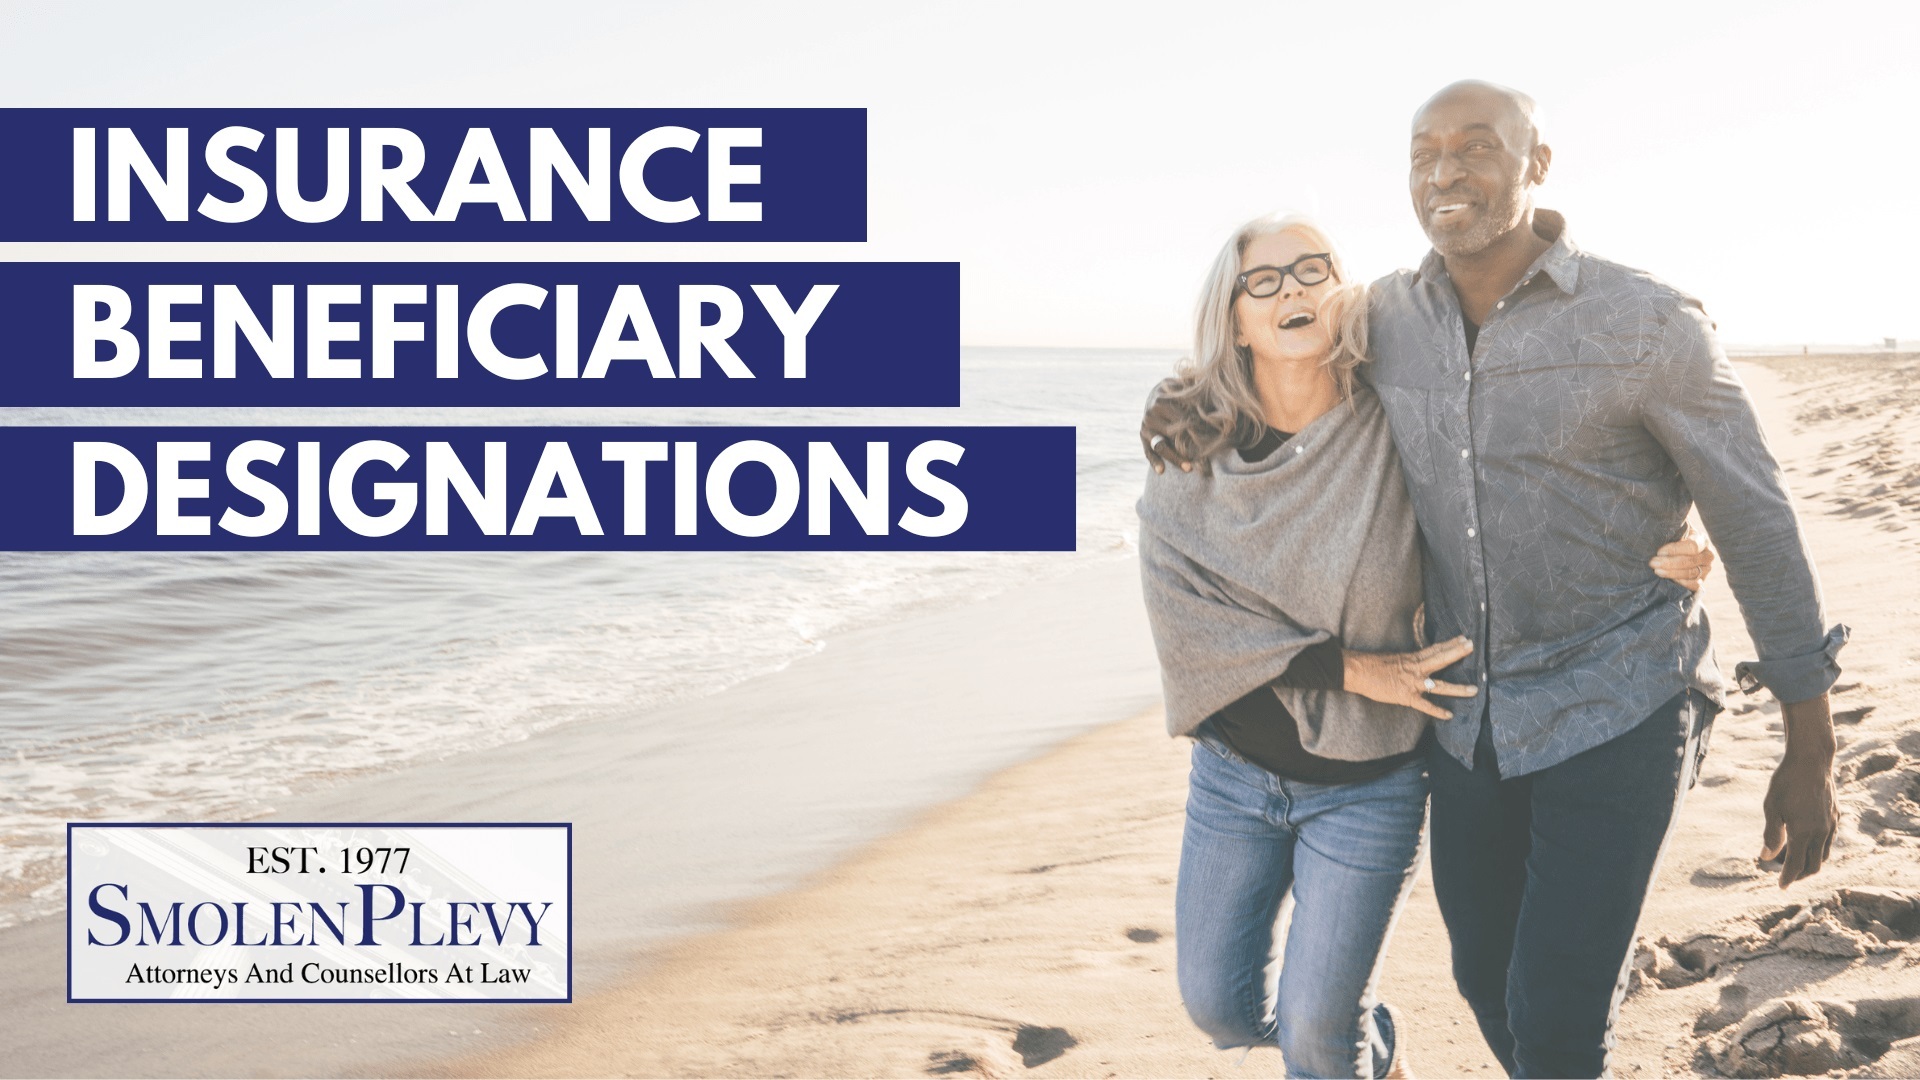 When to review your insurance beneficiary designations